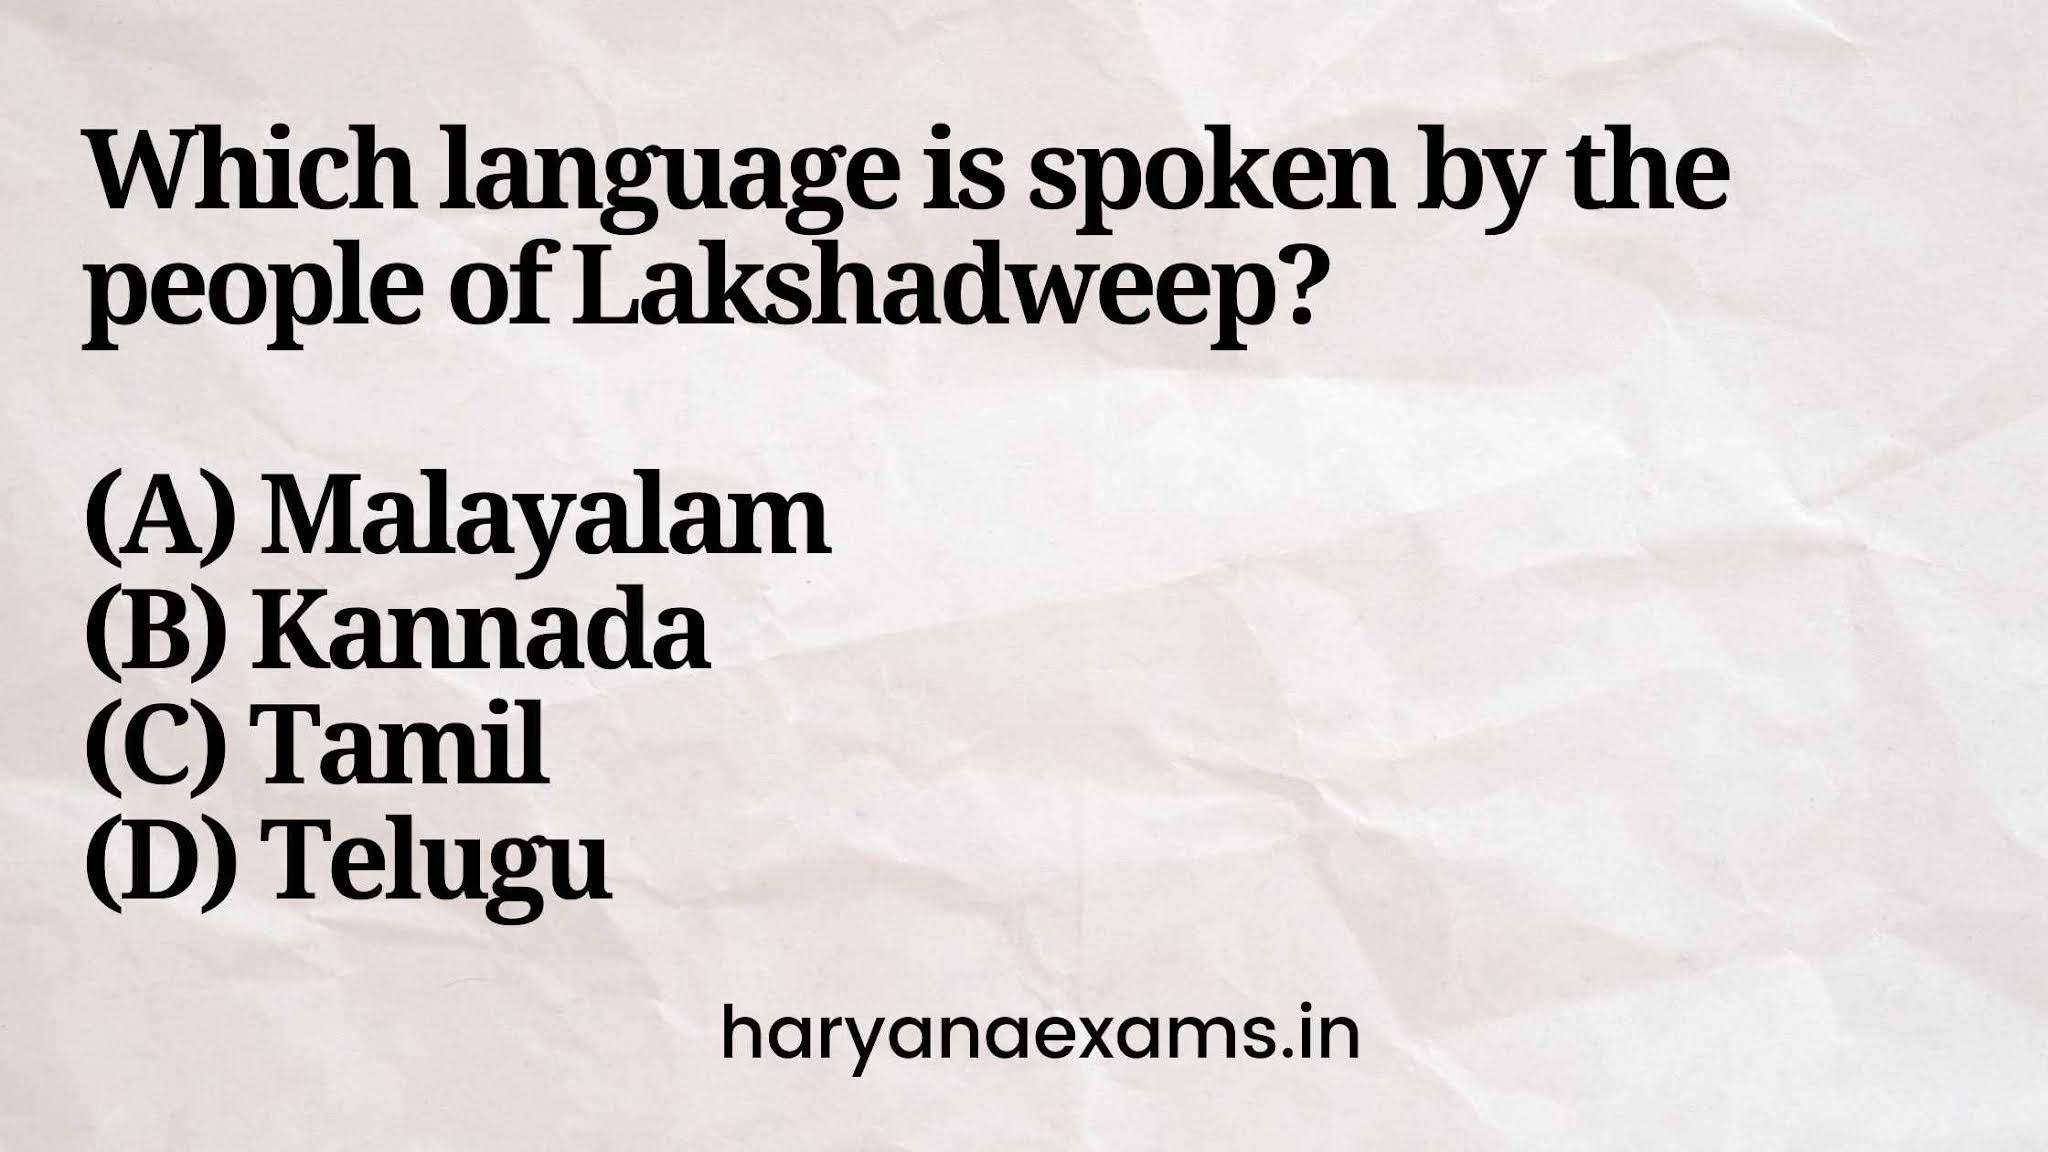 Which language is spoken by the people of Lakshadweep? (A) Malayalam (B) Kannada (C) Tamil (D) Telugu